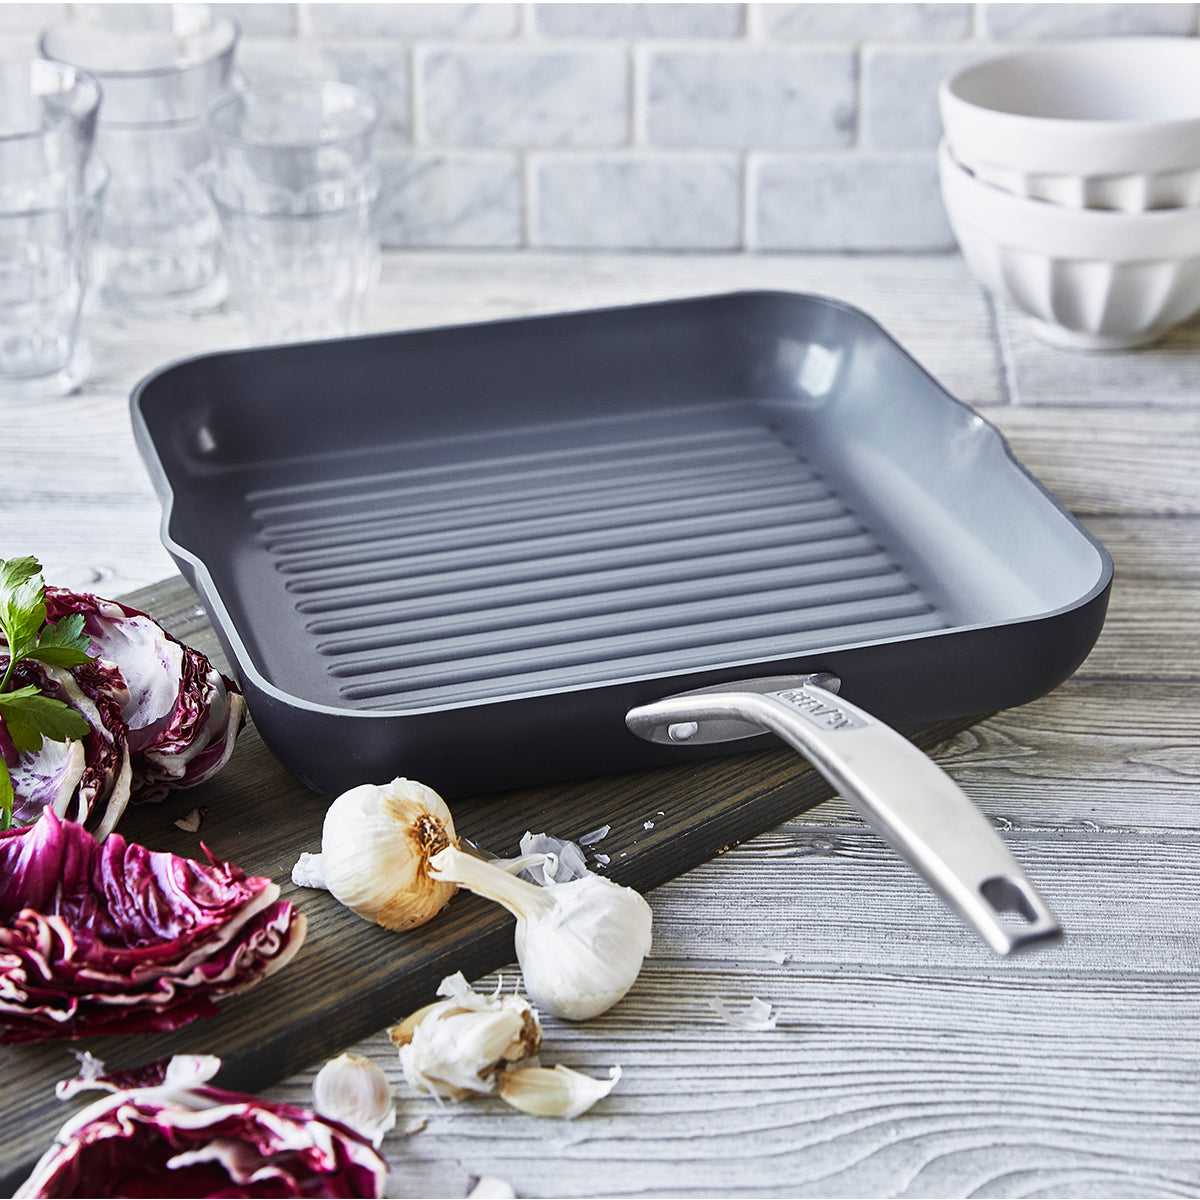 Shop the GreenPan Sale in March and Save Up to 50% on Cookware